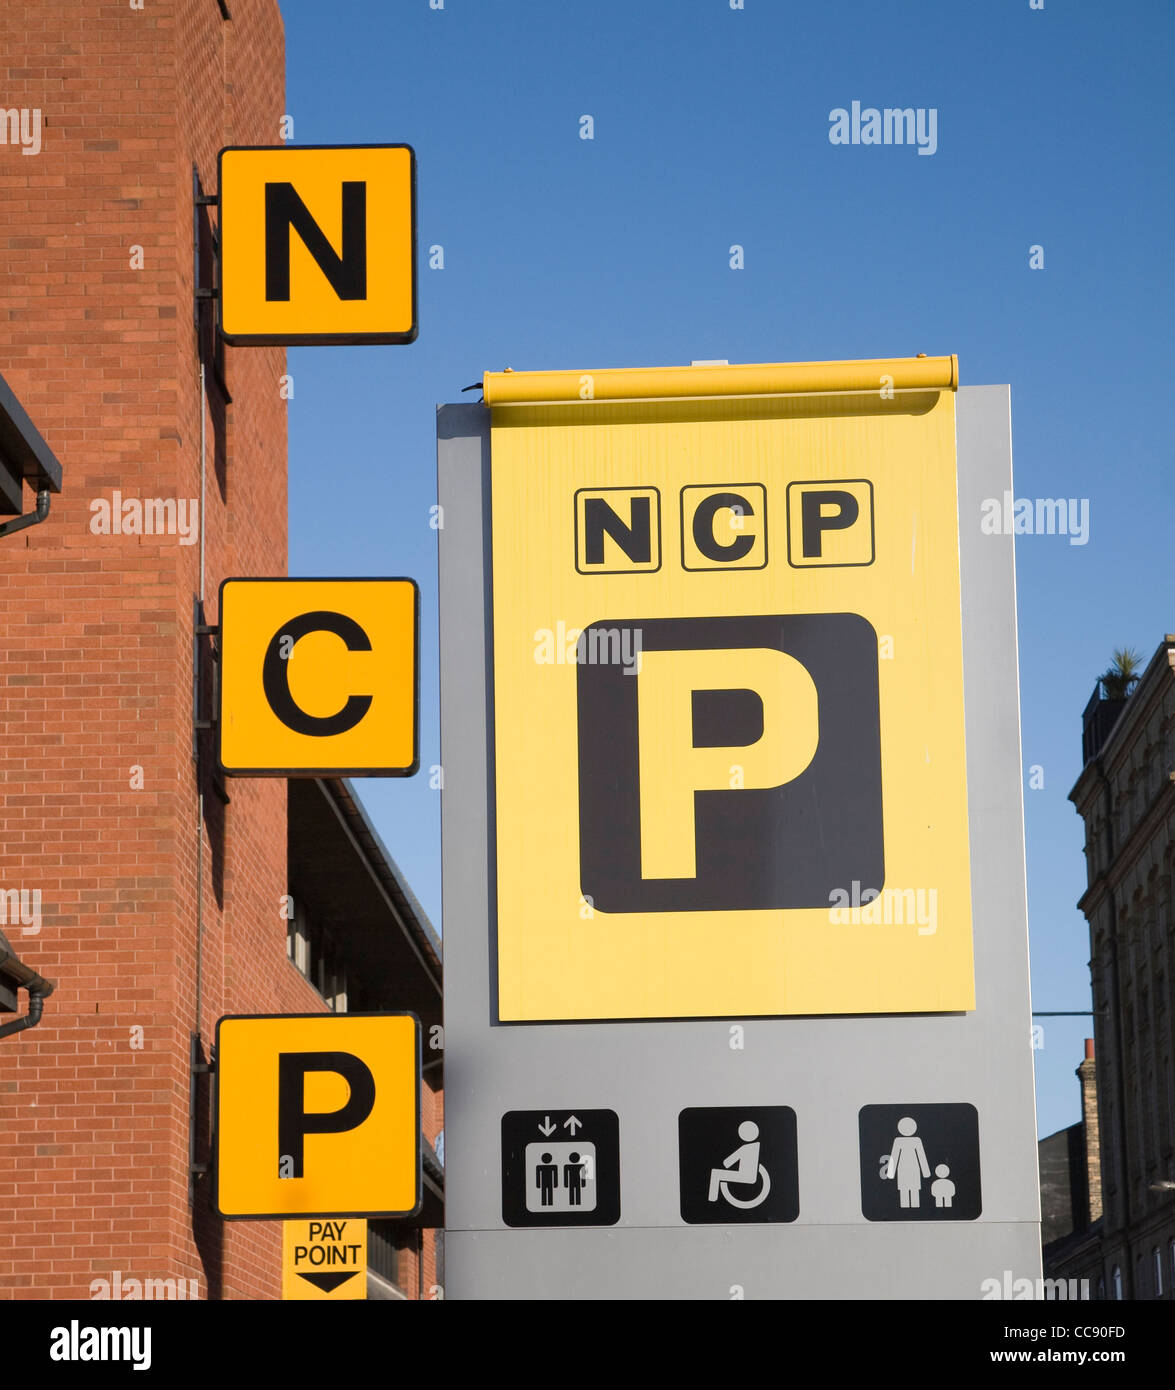 Parking NCP Foundation Street Ipswich Banque D'Images